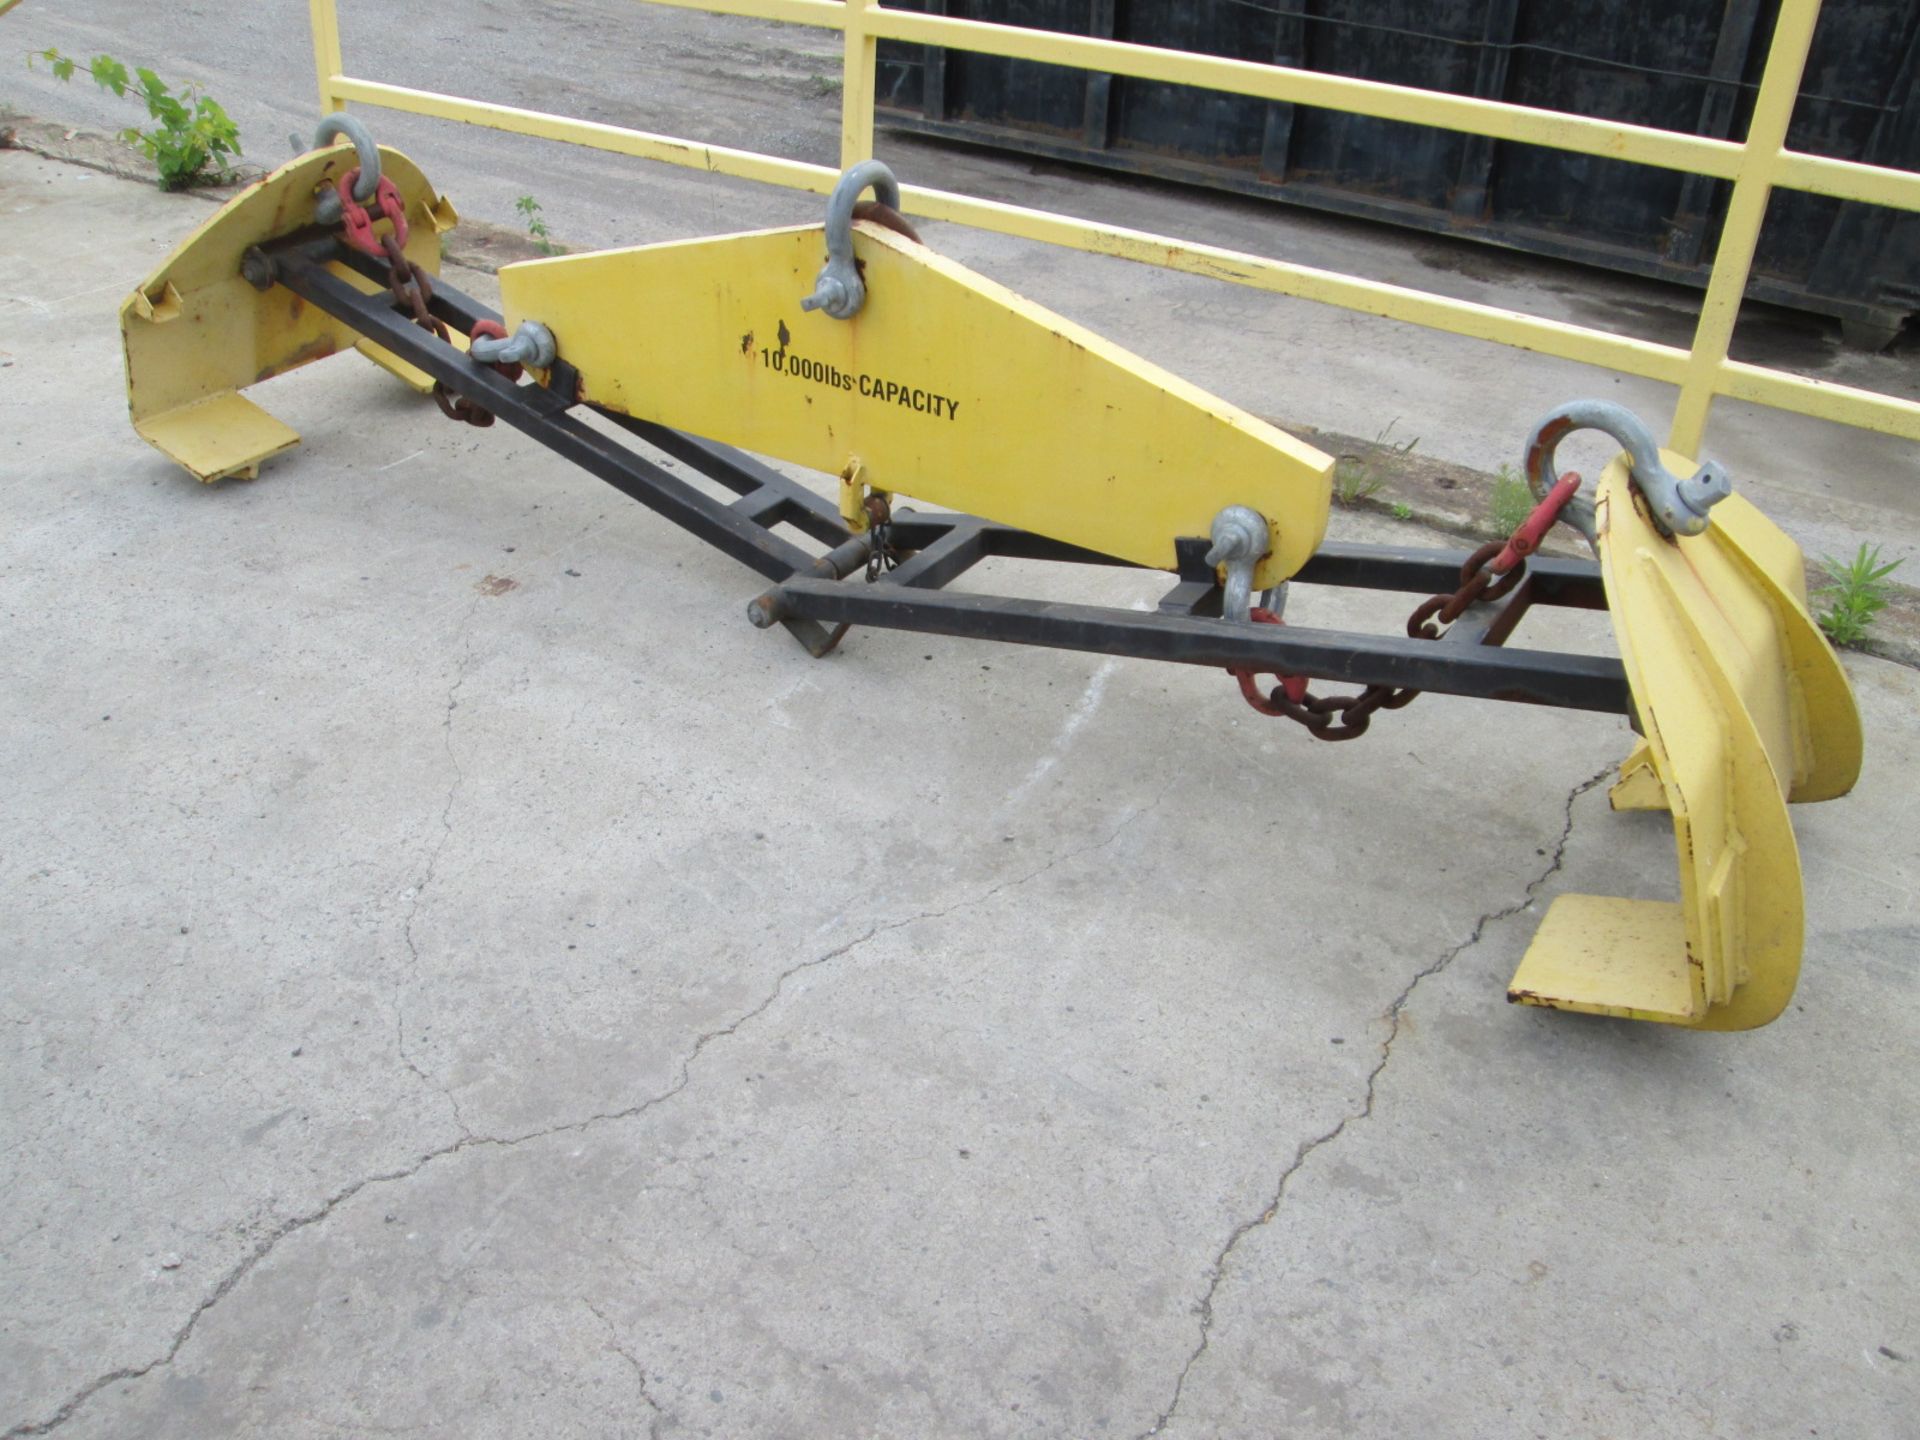 Steel plate or bar lifter - 9' max width or length - capacity 10,000lbs or 5 ton